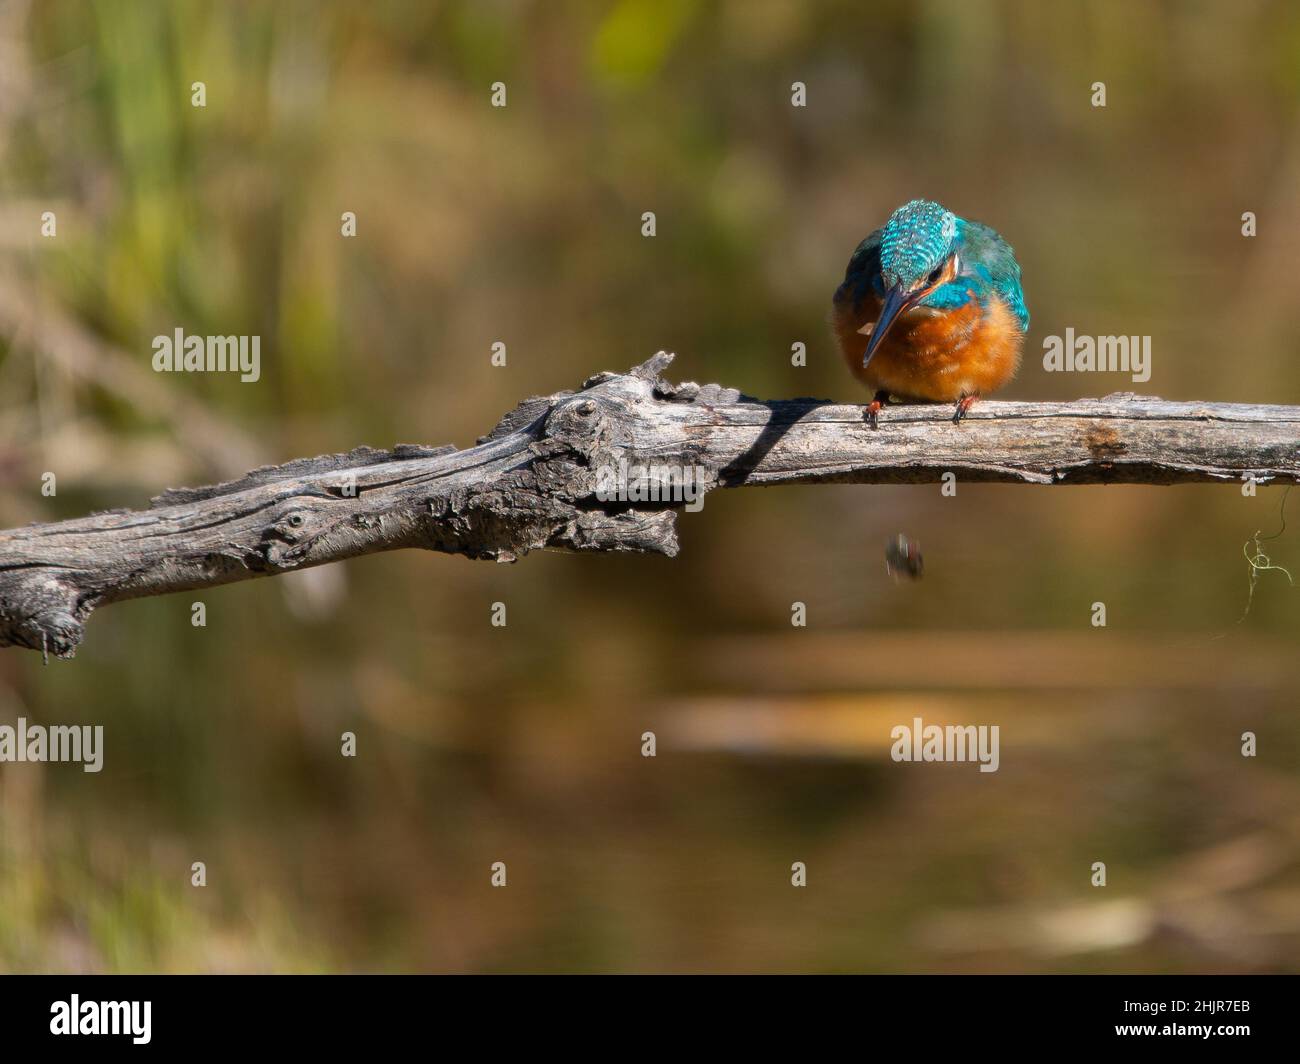 Common kingfisher dropping its meal. Stock Photo